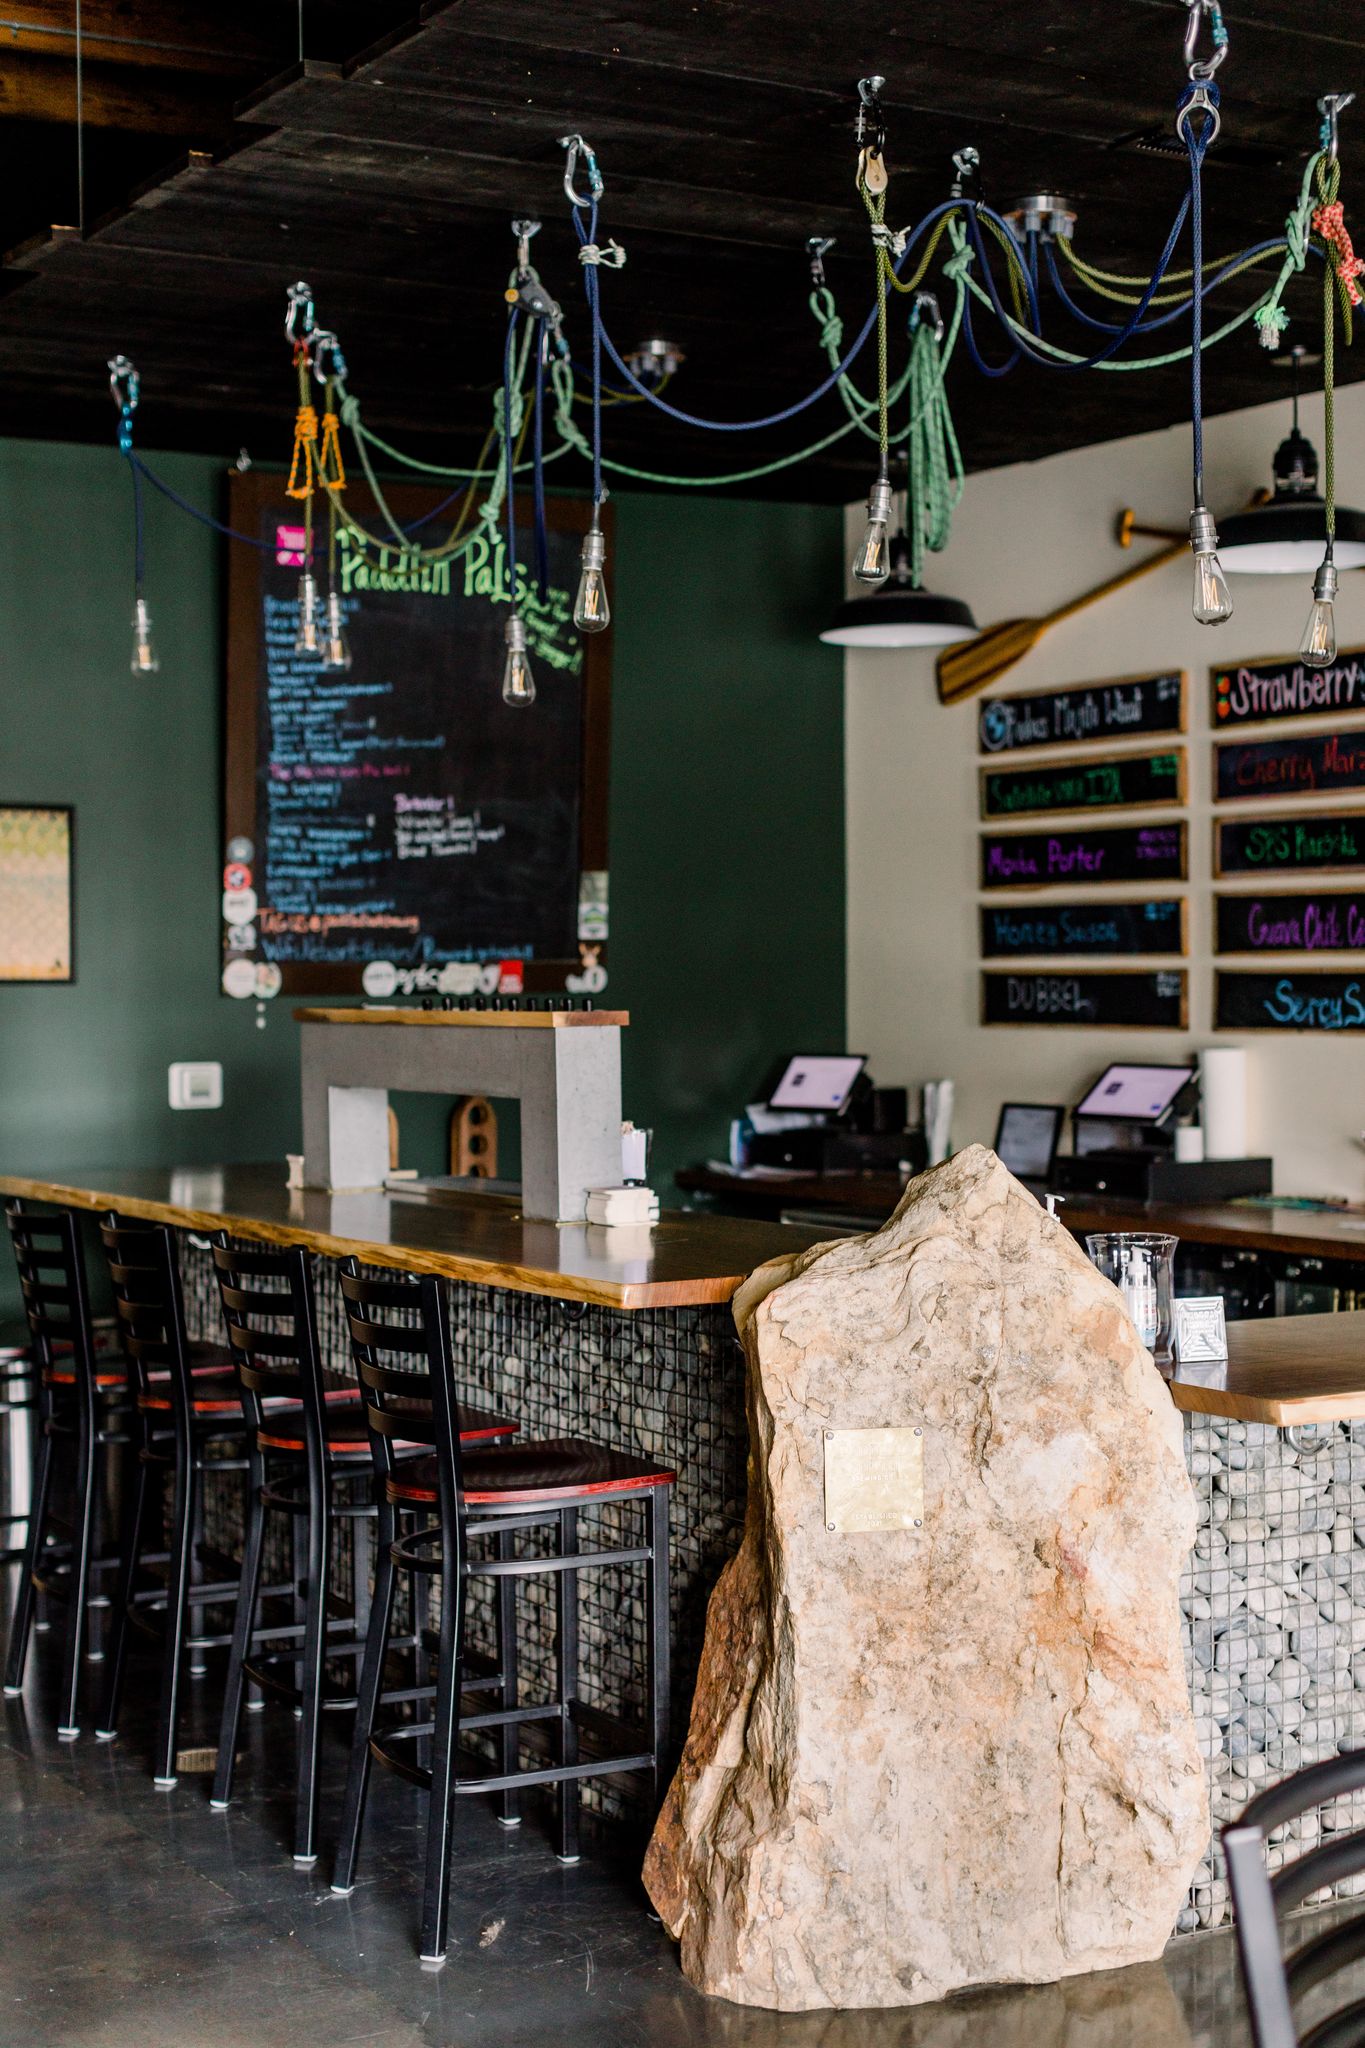 Bar and taps at Paddled South Brewing Co. in High Point, NC, designed with rock wall by Stabb Designs.